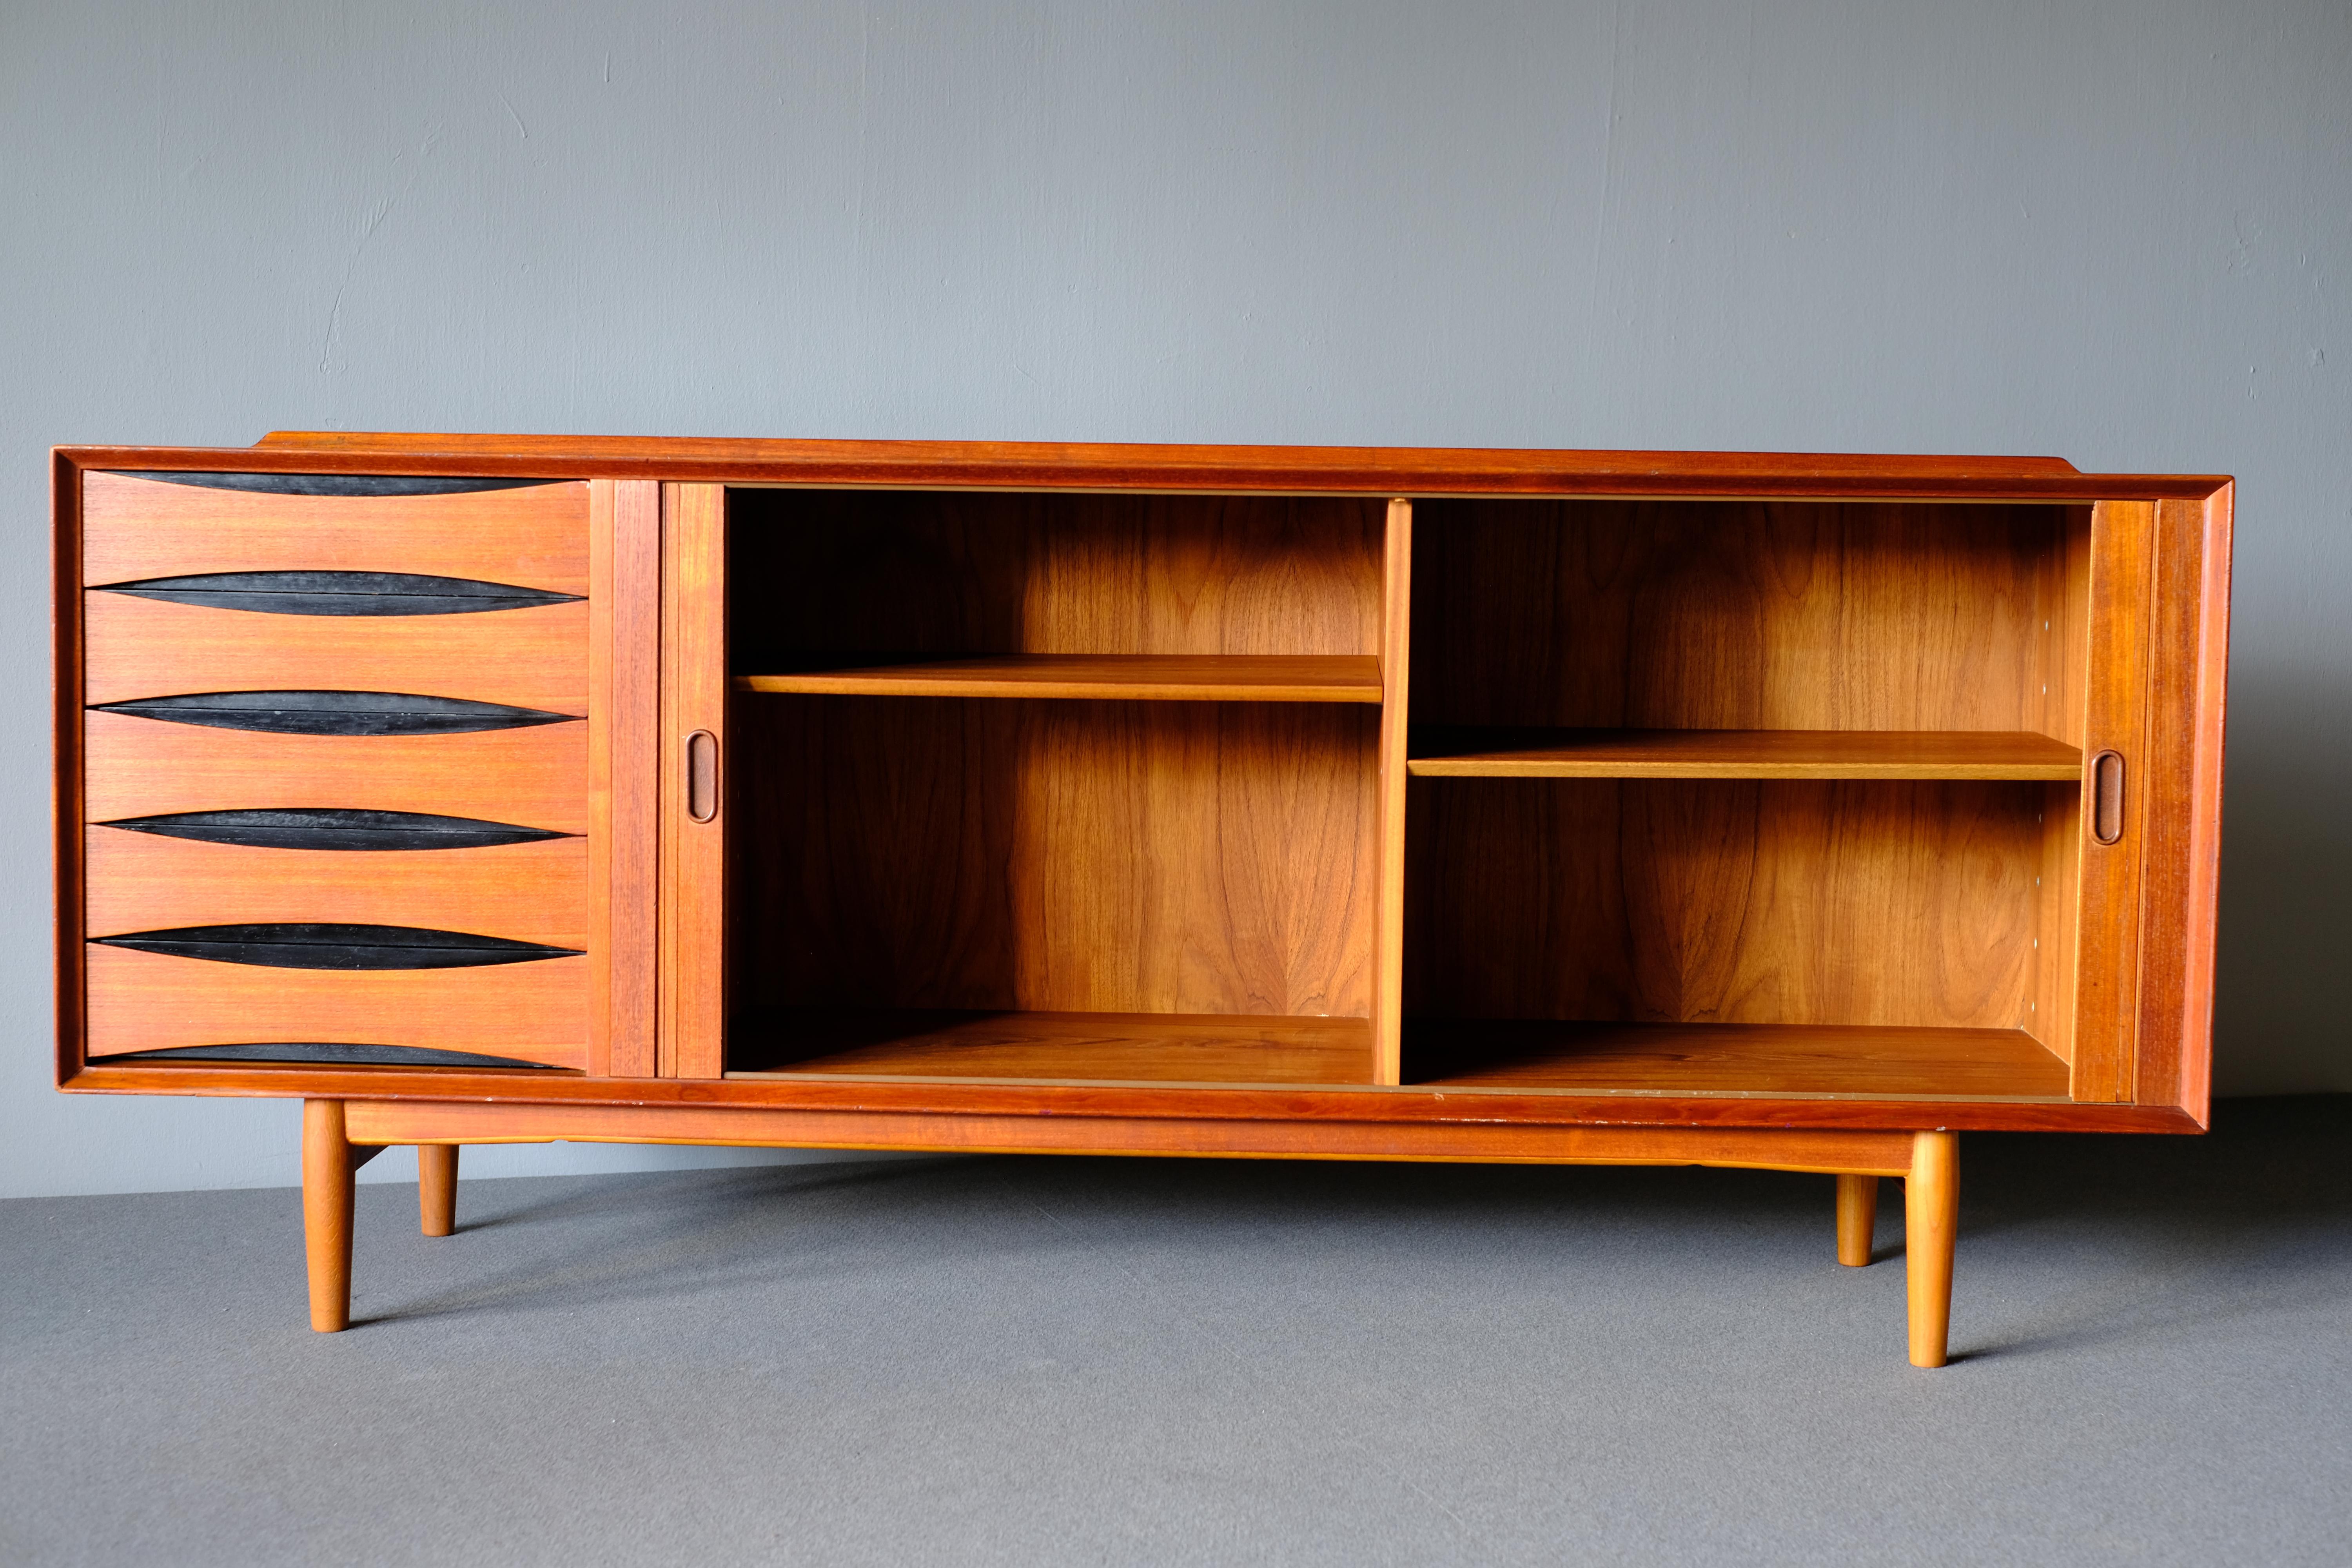 Arne Vodder sideboard in teak for Sibast Furniture. This wonderfully designed piece has 2 ingenious tambour doors which open to reveal shelving. It has 5 drawers with Vodder’s signature distinctive drawer pulls with black lacquered back panels. A